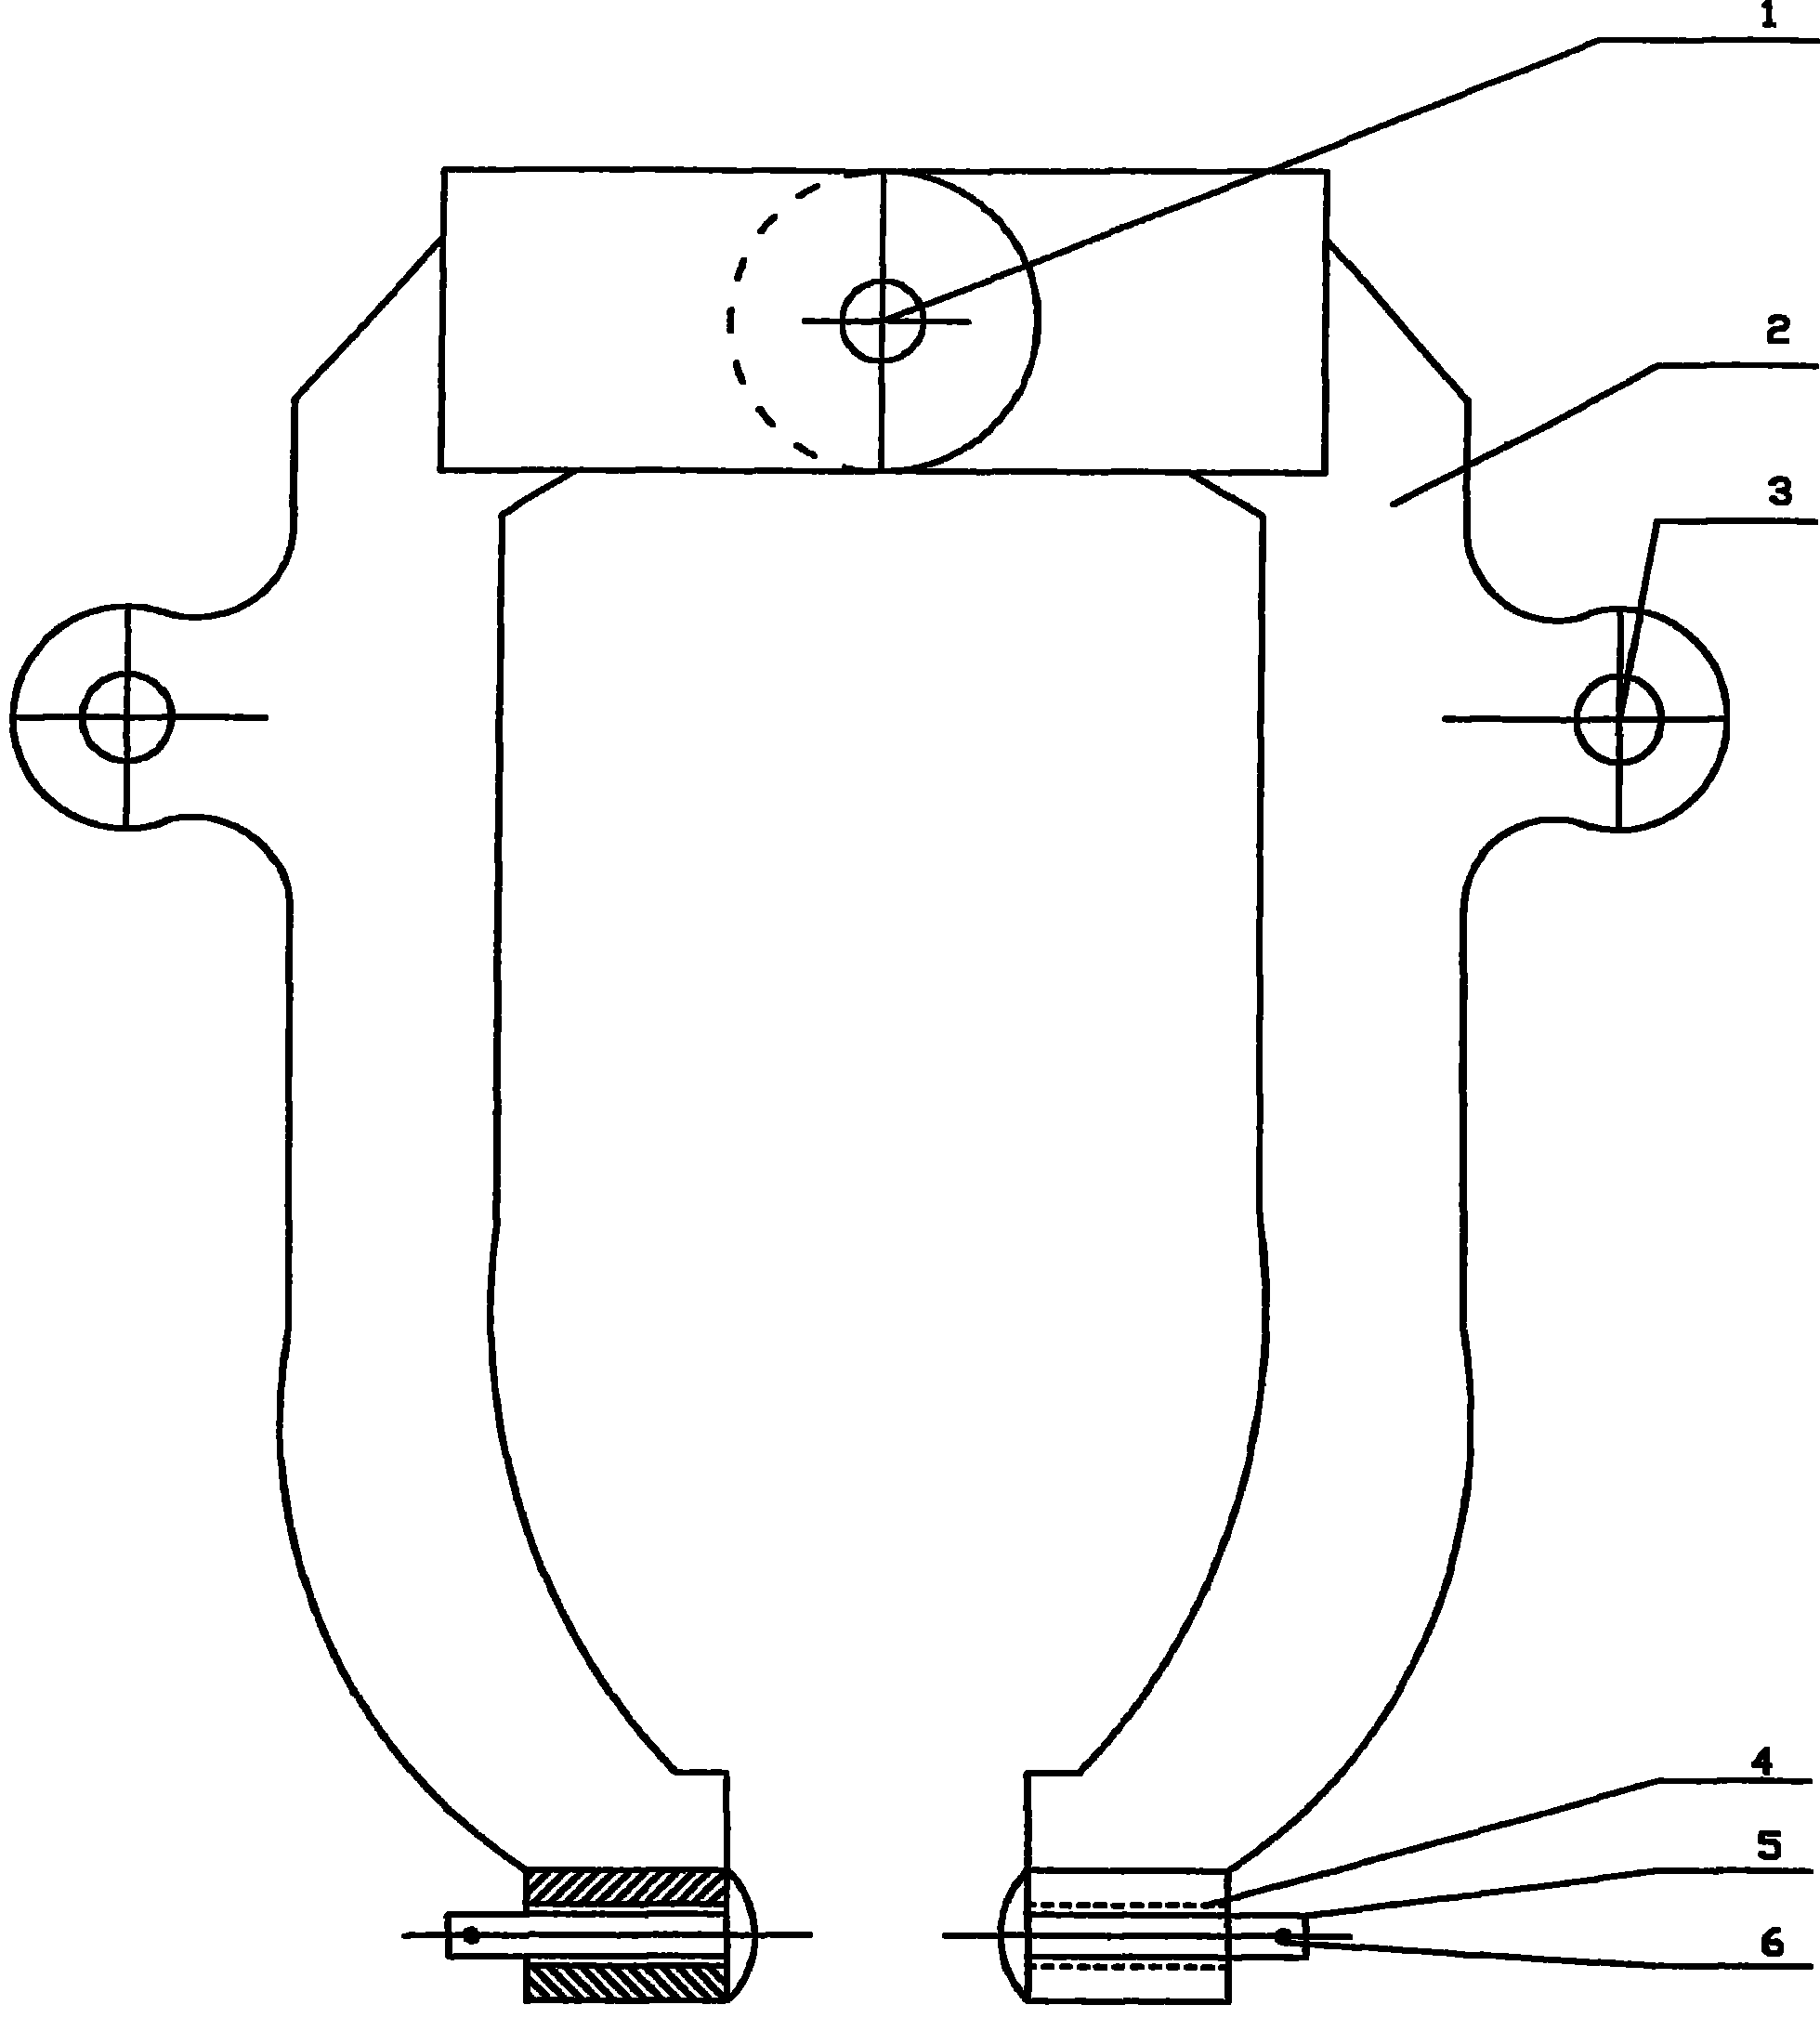 Non-flash groove, non ingot tail smithing method for large-scale wind power principal axle